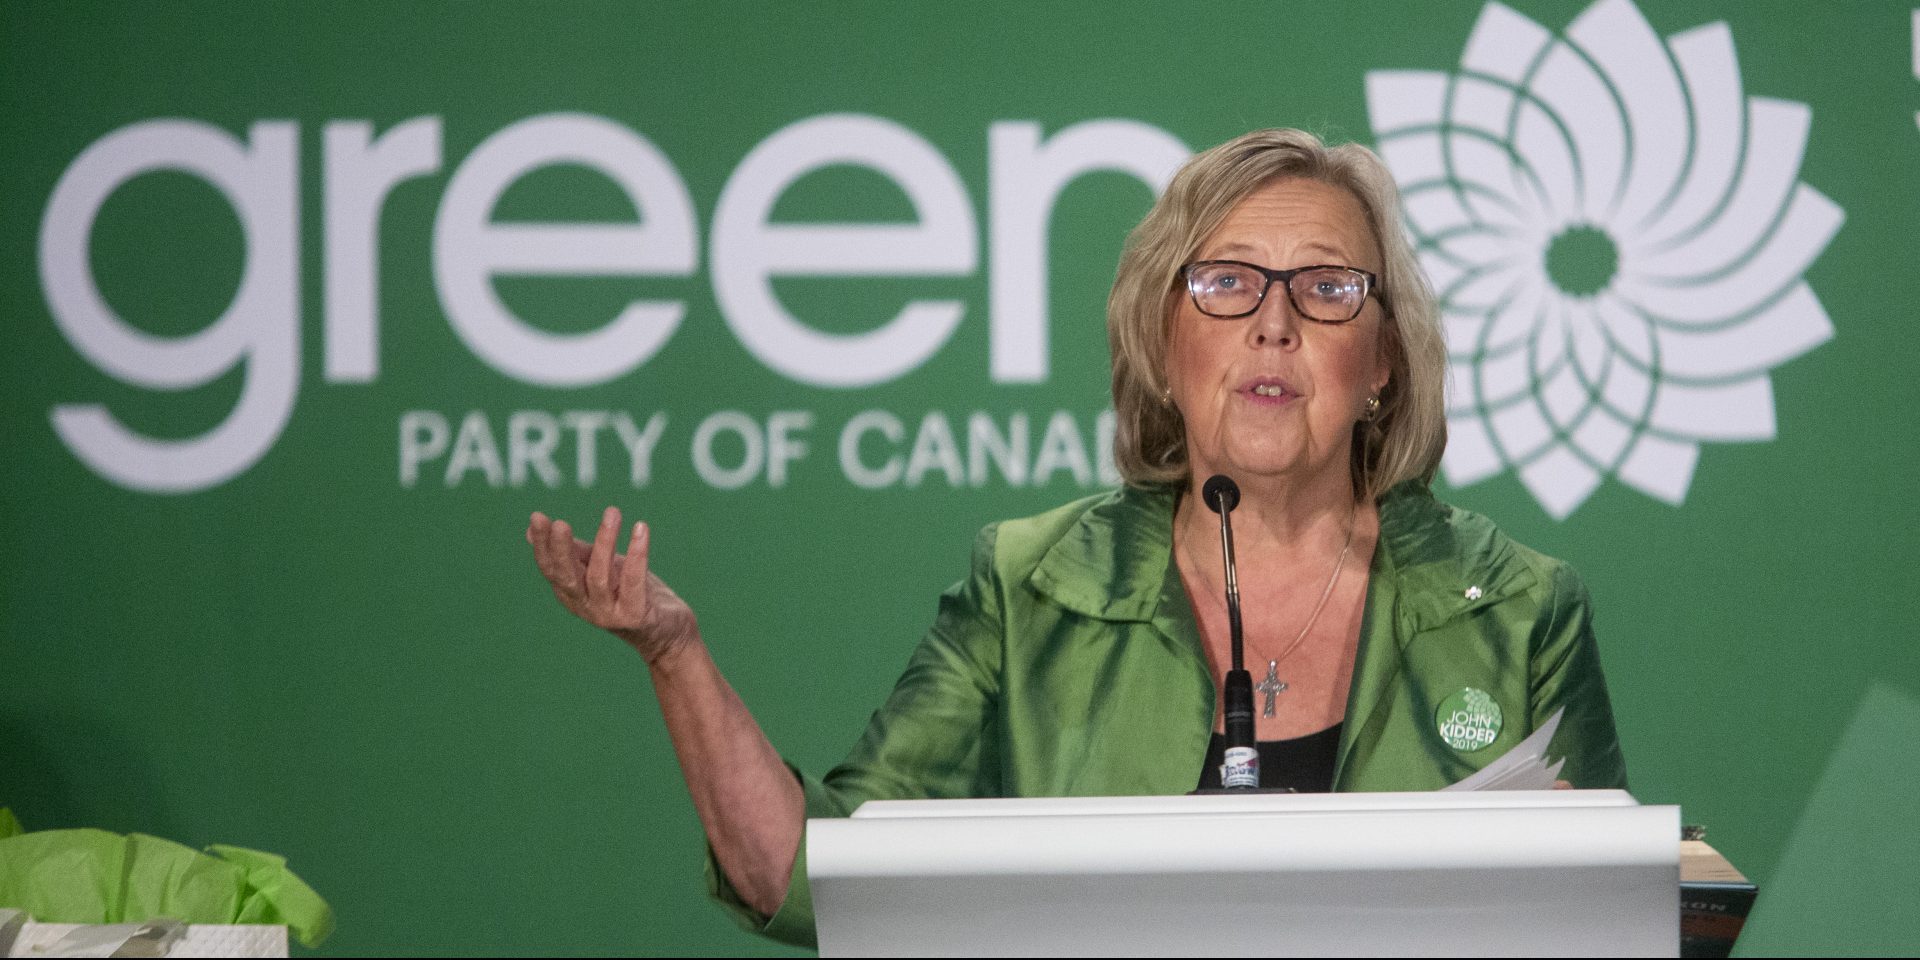 Green Party of Canada former leader Elizabeth May speaks at the party’s leadership convention in Ottawa on  Oct. 3, 2020.